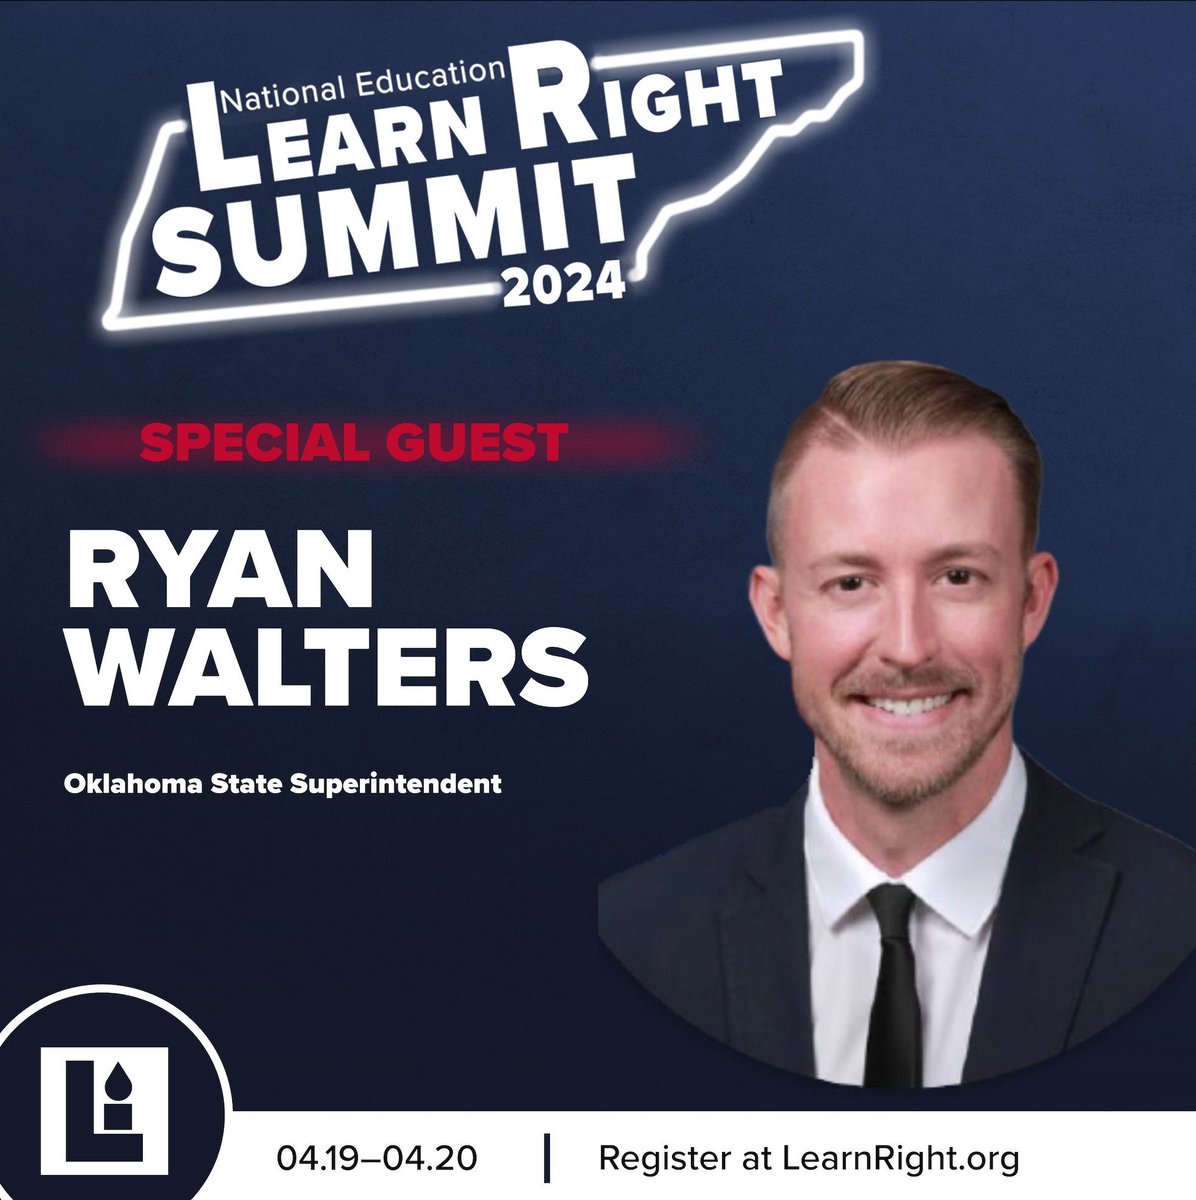 Thrilled to announce Oklahoma State Superintendent @RyanWaltersSupt is joining us at the #learnright24 Summit in Nashville, TN this weekend!

There is still time to sign up!

Register at Learnright.org

#ryanwalters #learnright #lr24 #nashville #education #learnleadwin